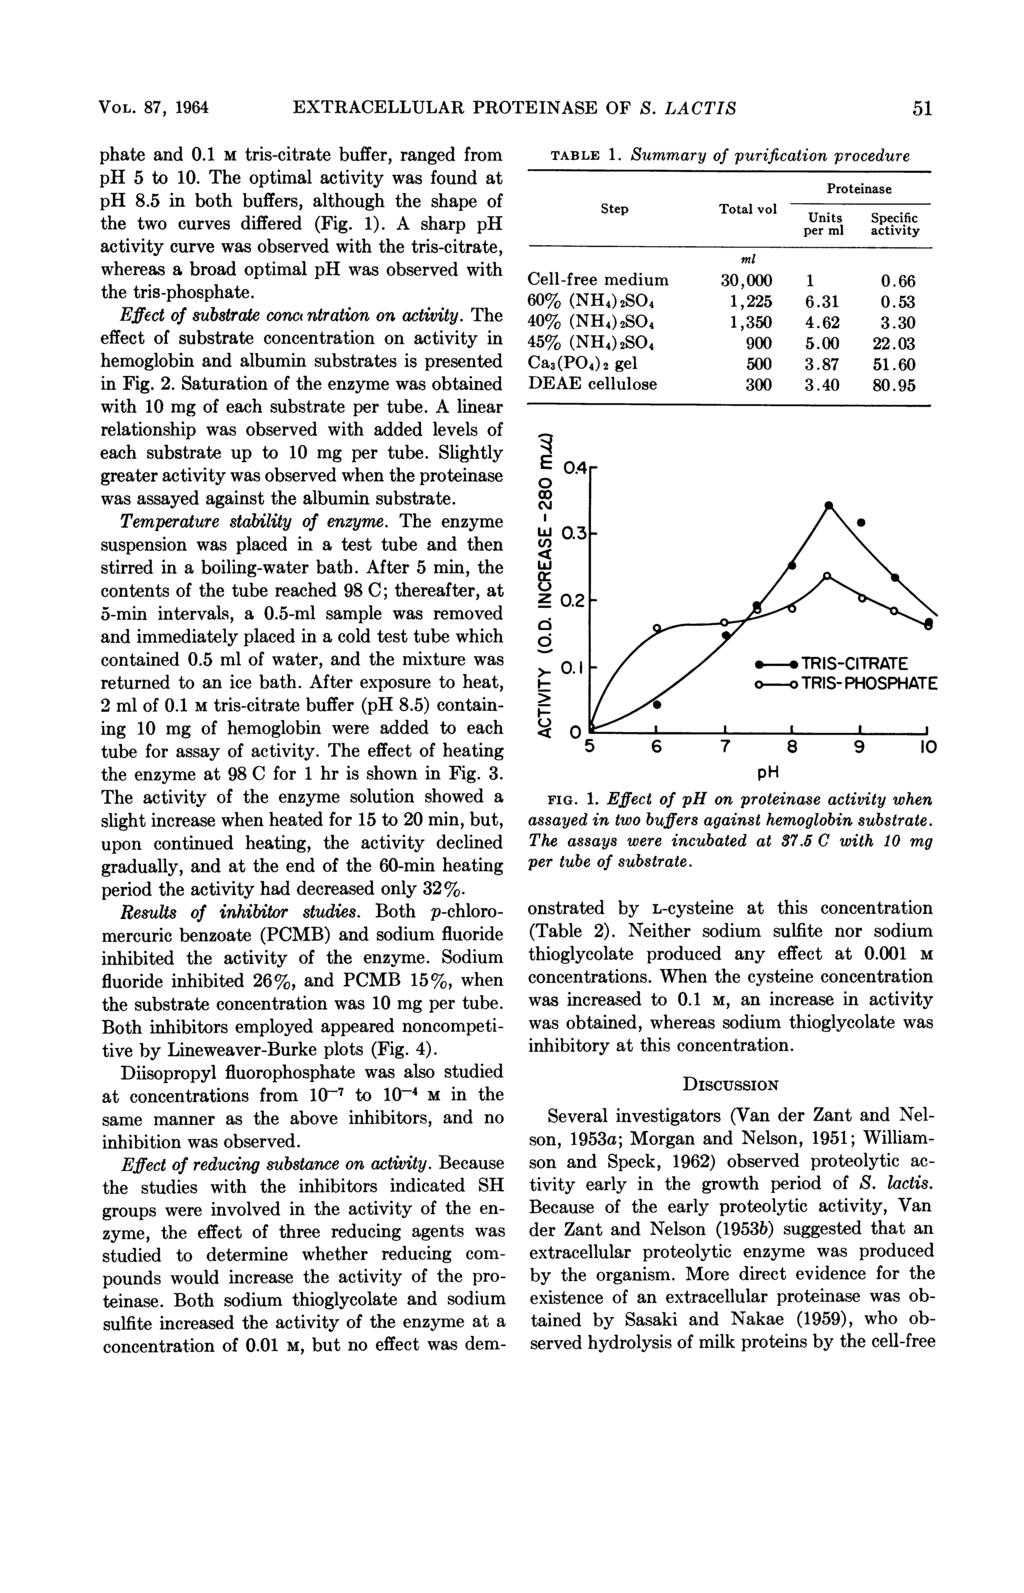 VOL. 87, 1964 EXTRACELLULAR PROTEINASE OF S. LACTIS 51 phate and.1 M tris-citrate buffer, ranged from ph 5 to 1. The optimal activity as found at ph 8.